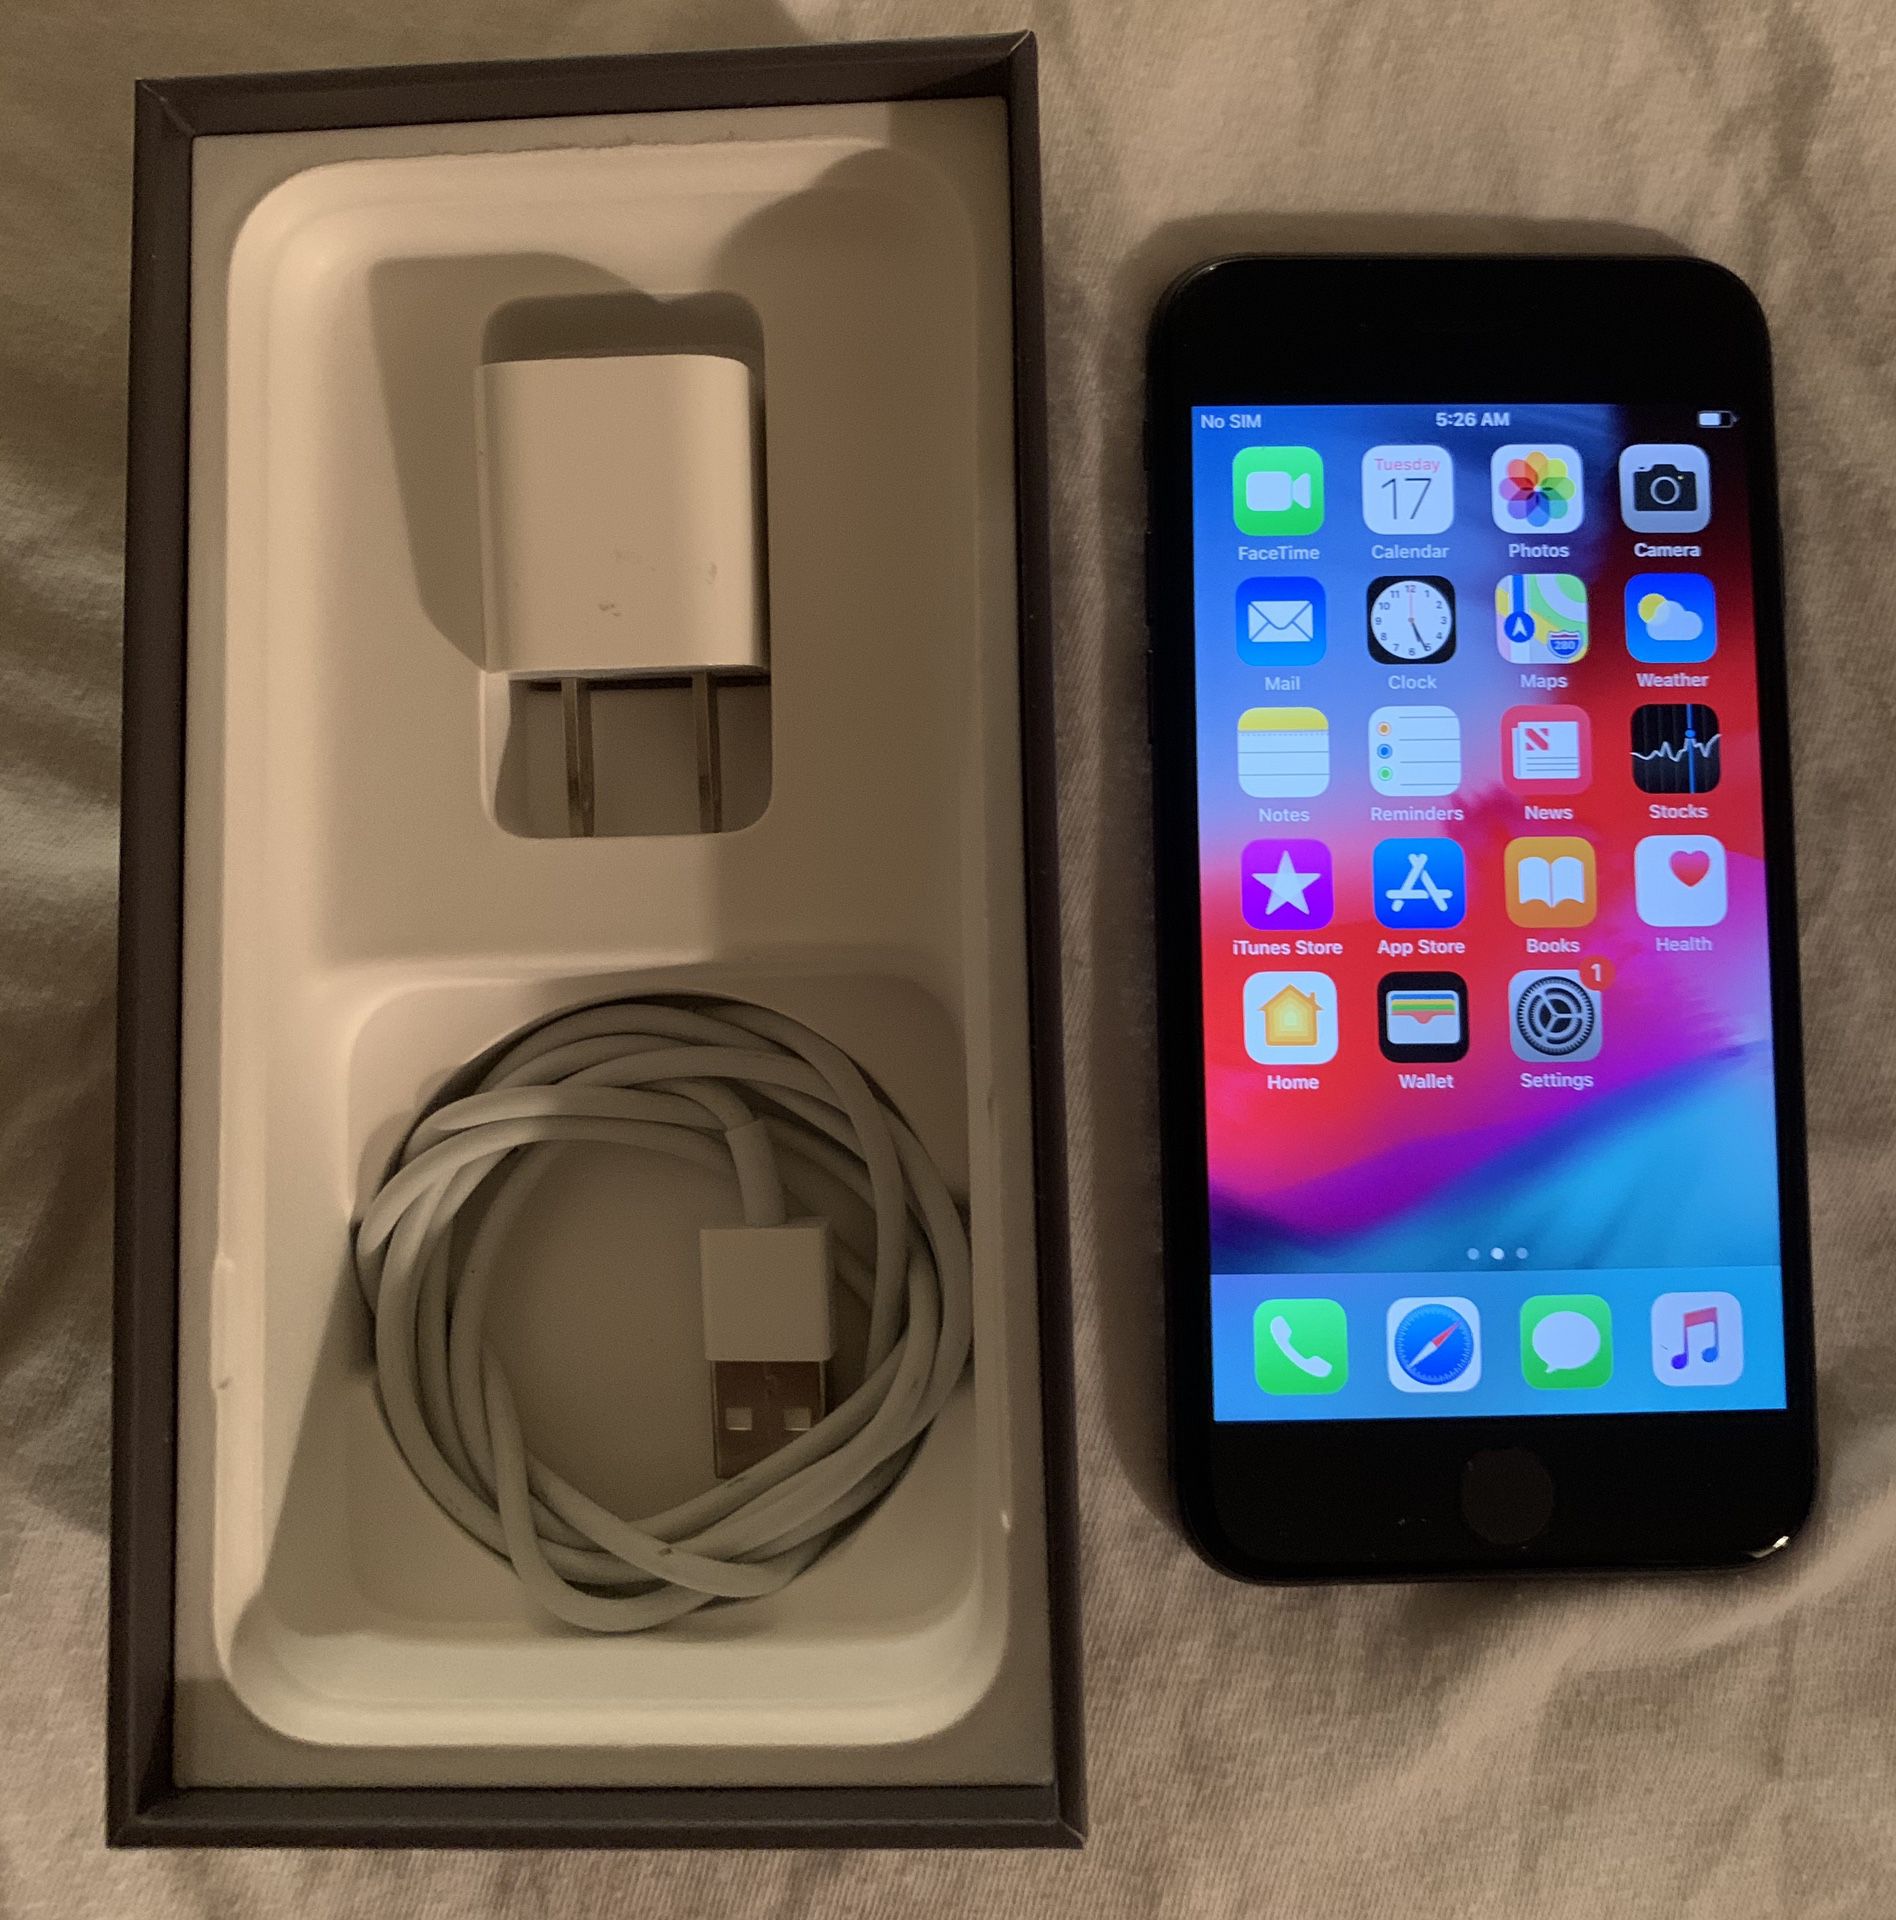 IPHONE 8 64GB (NOT PLUS) Factory Unlocked Excellent condition, like new. Battery Health 100% Clean imei, paid in full, and ready for activation w